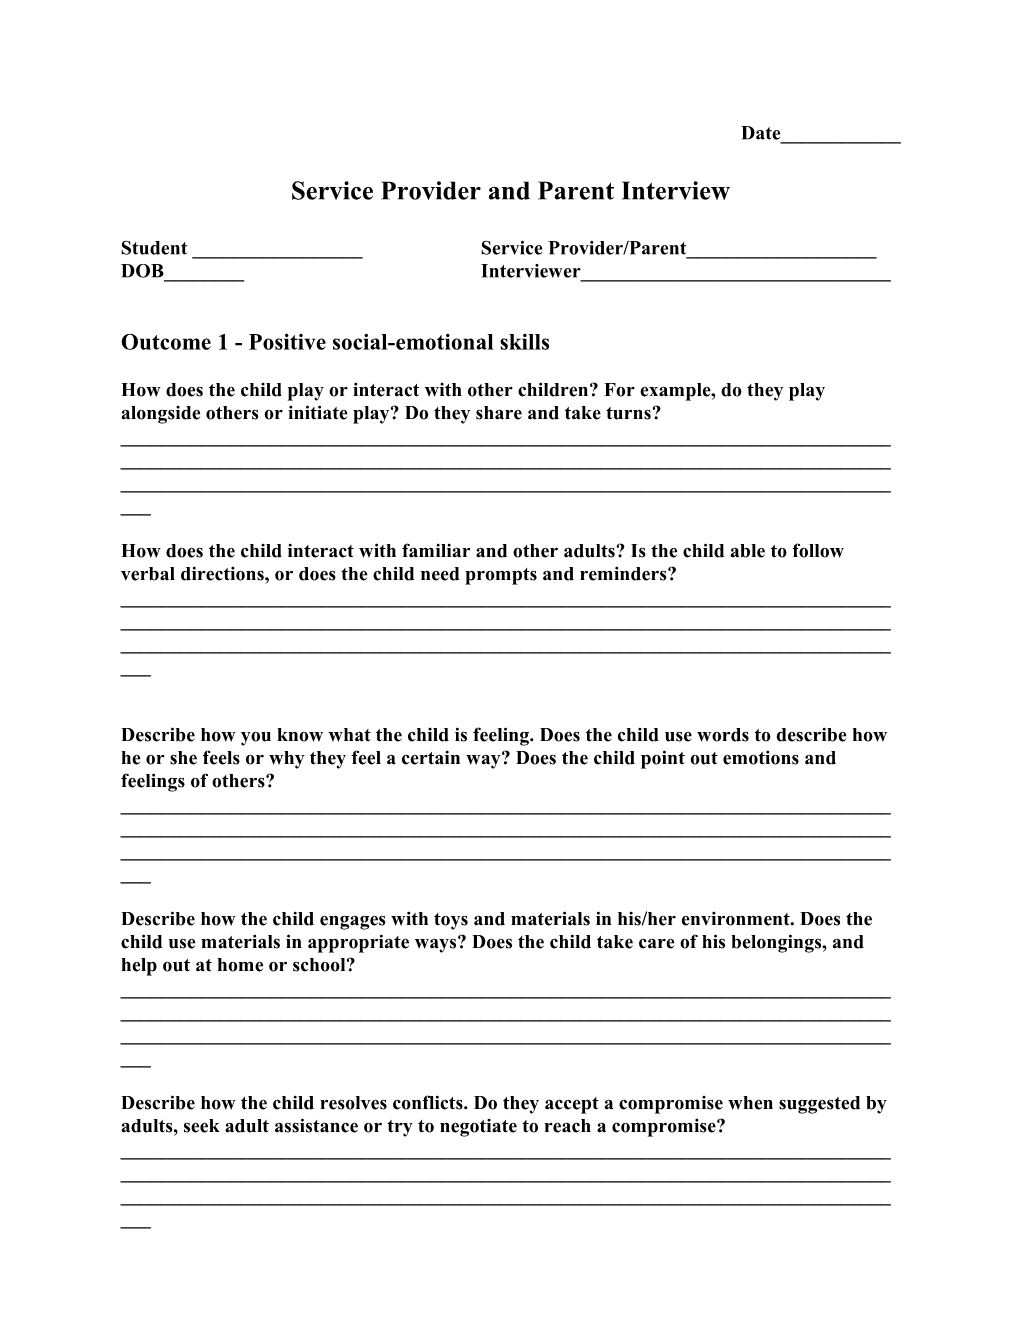 Service Provider and Parent Interview